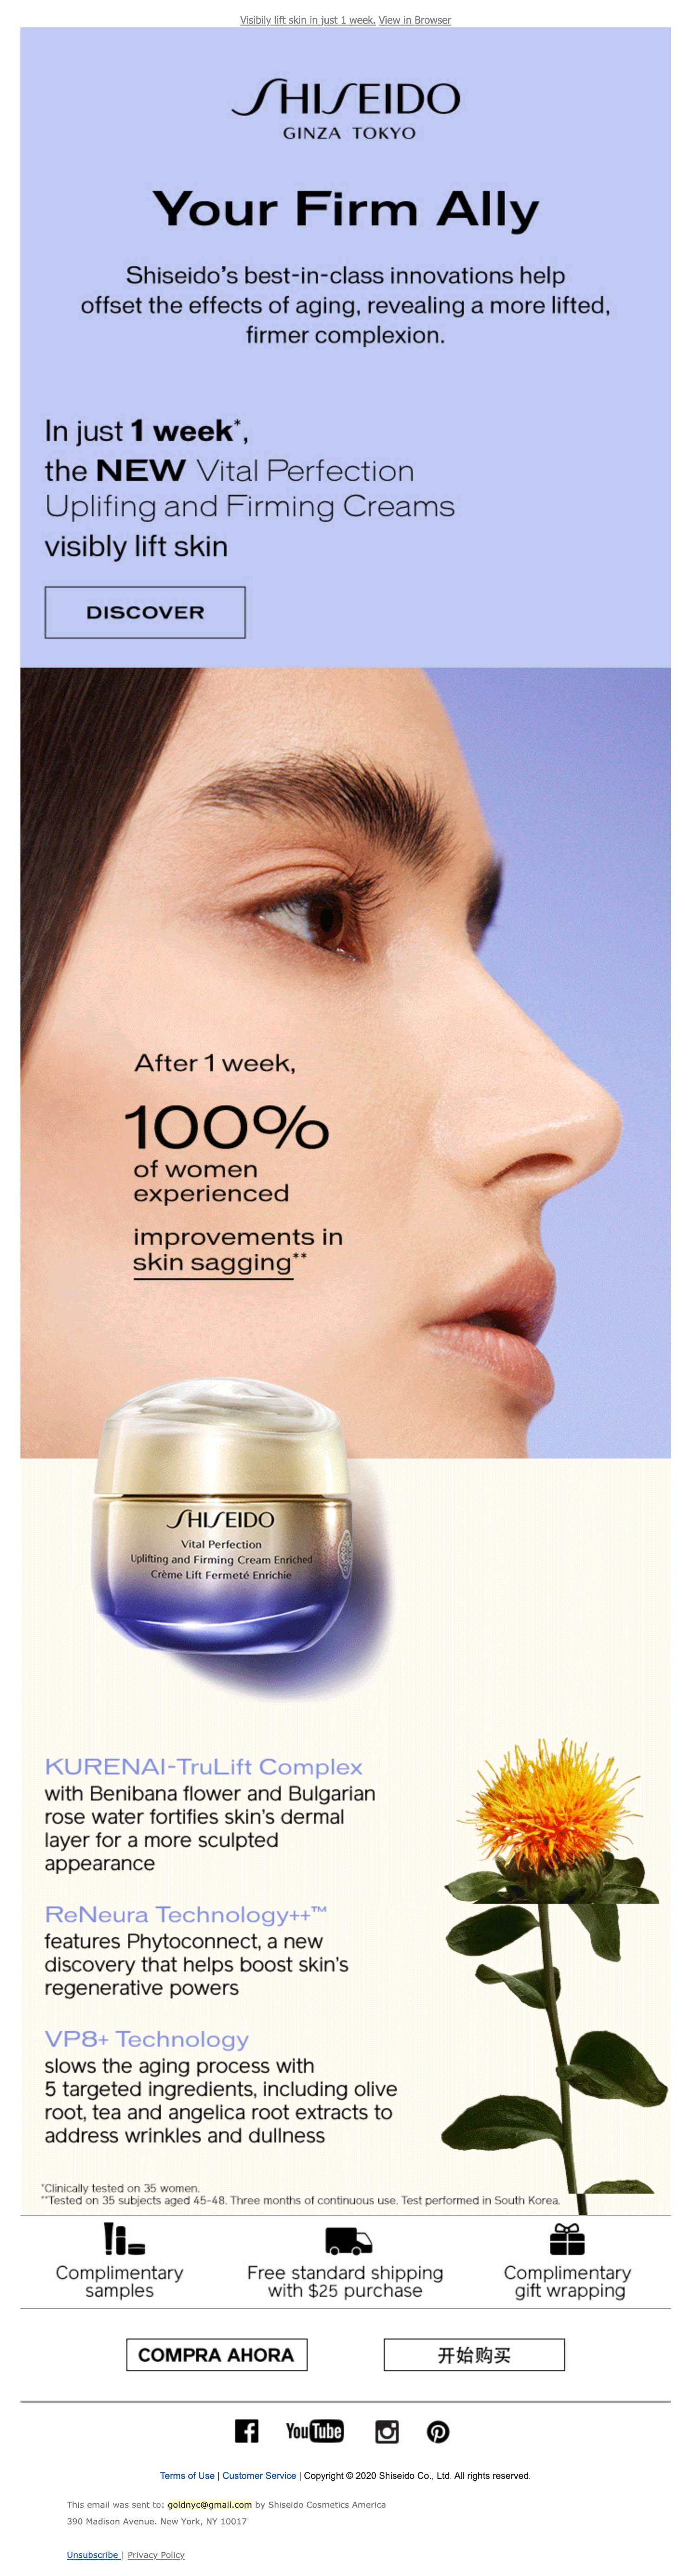 shiseido email 4.png